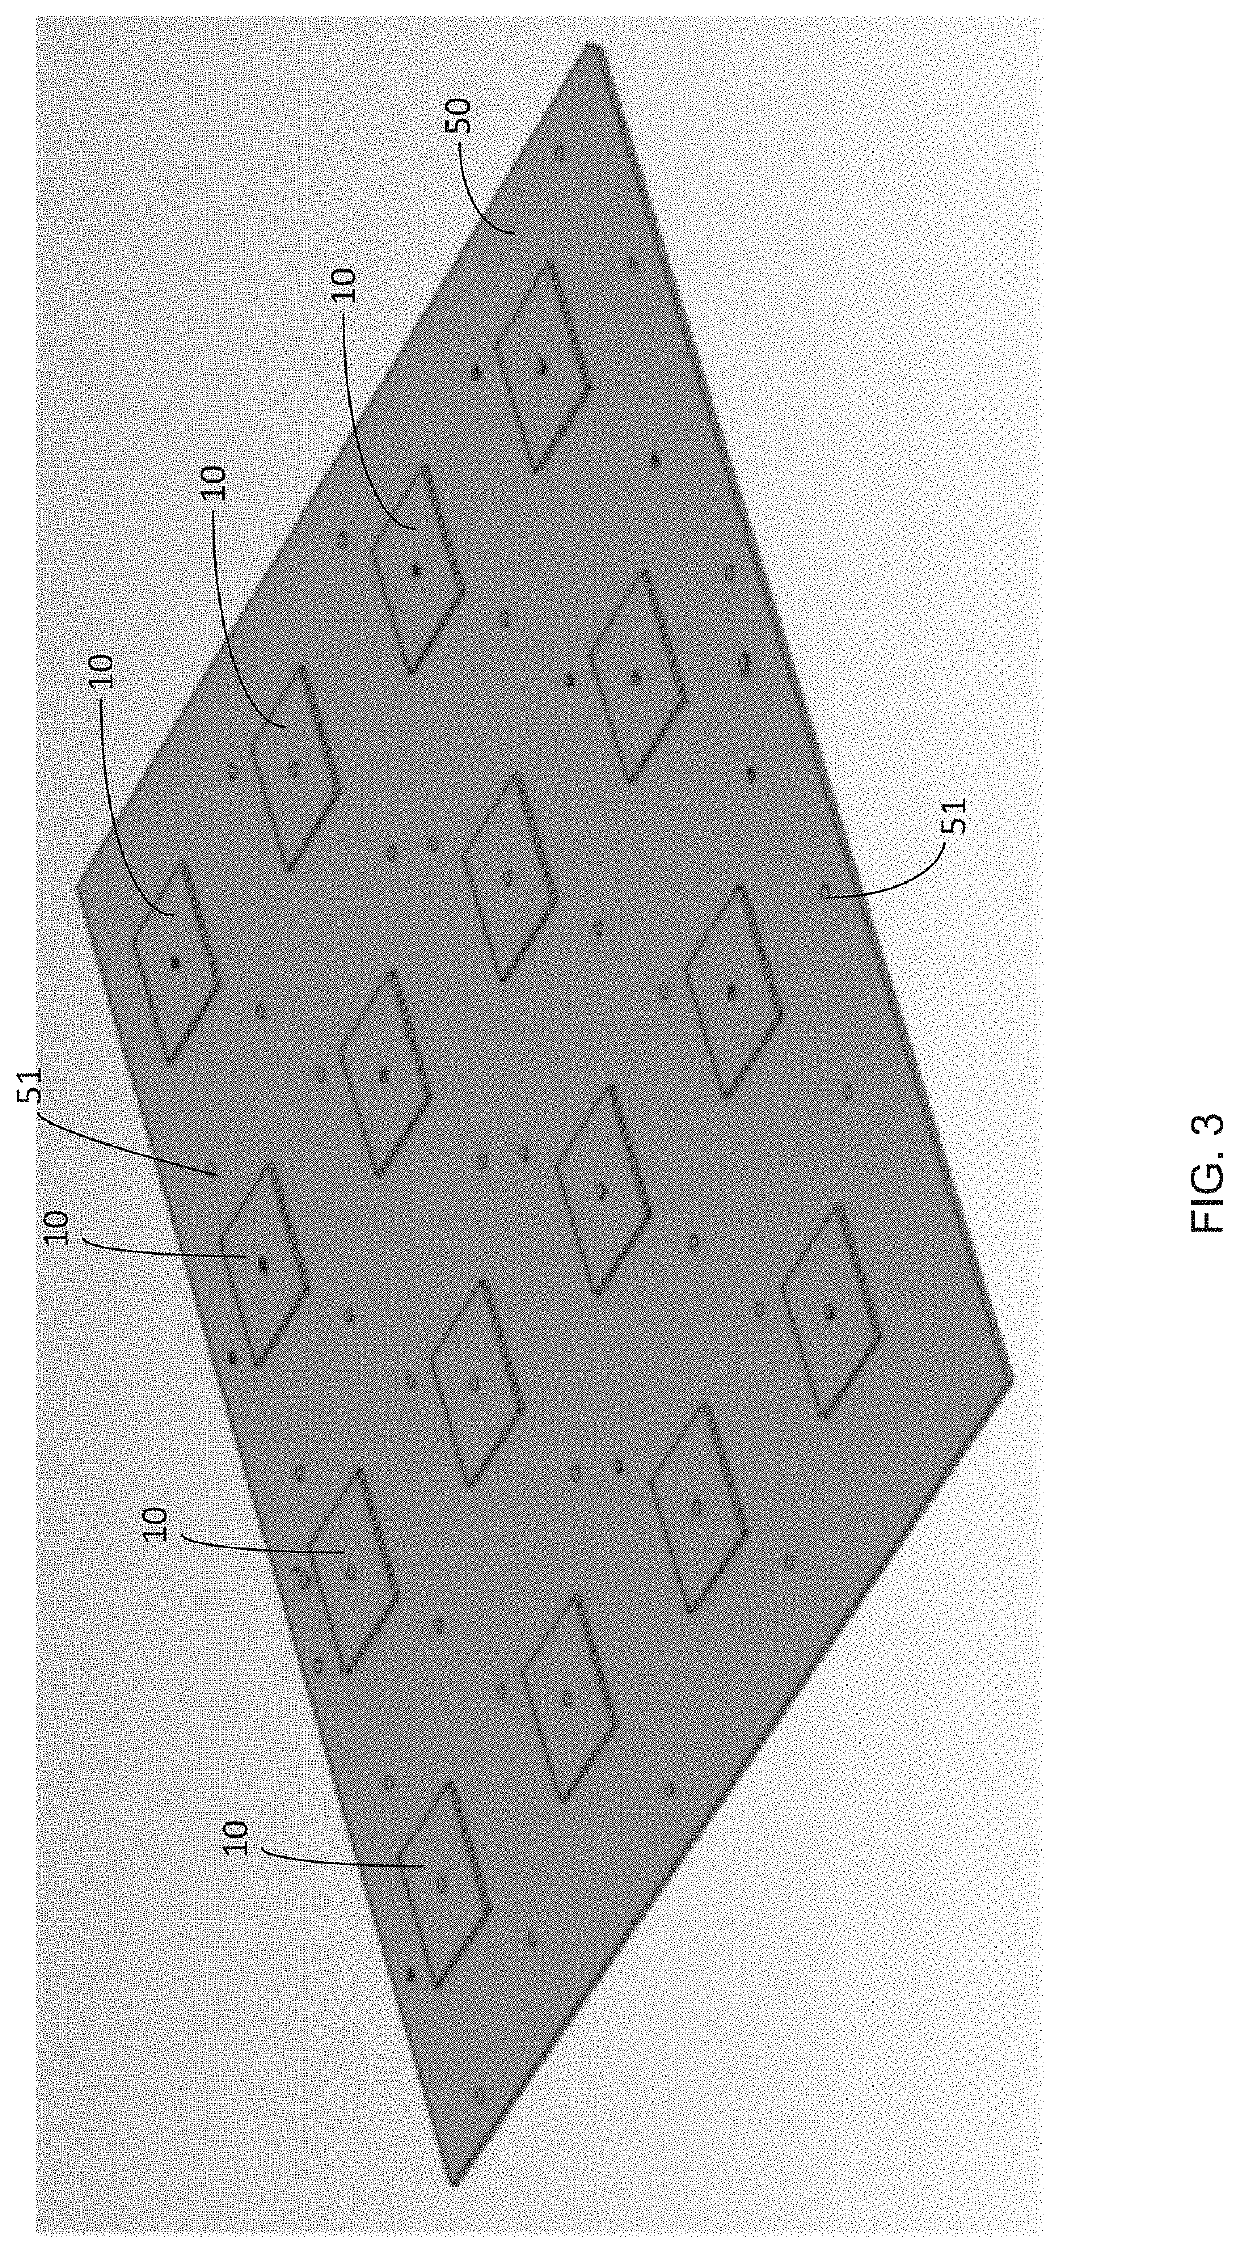 Ultra thin and compact dual polarized microstrip patch antenna array with 3-dimensional (3D) feeding network